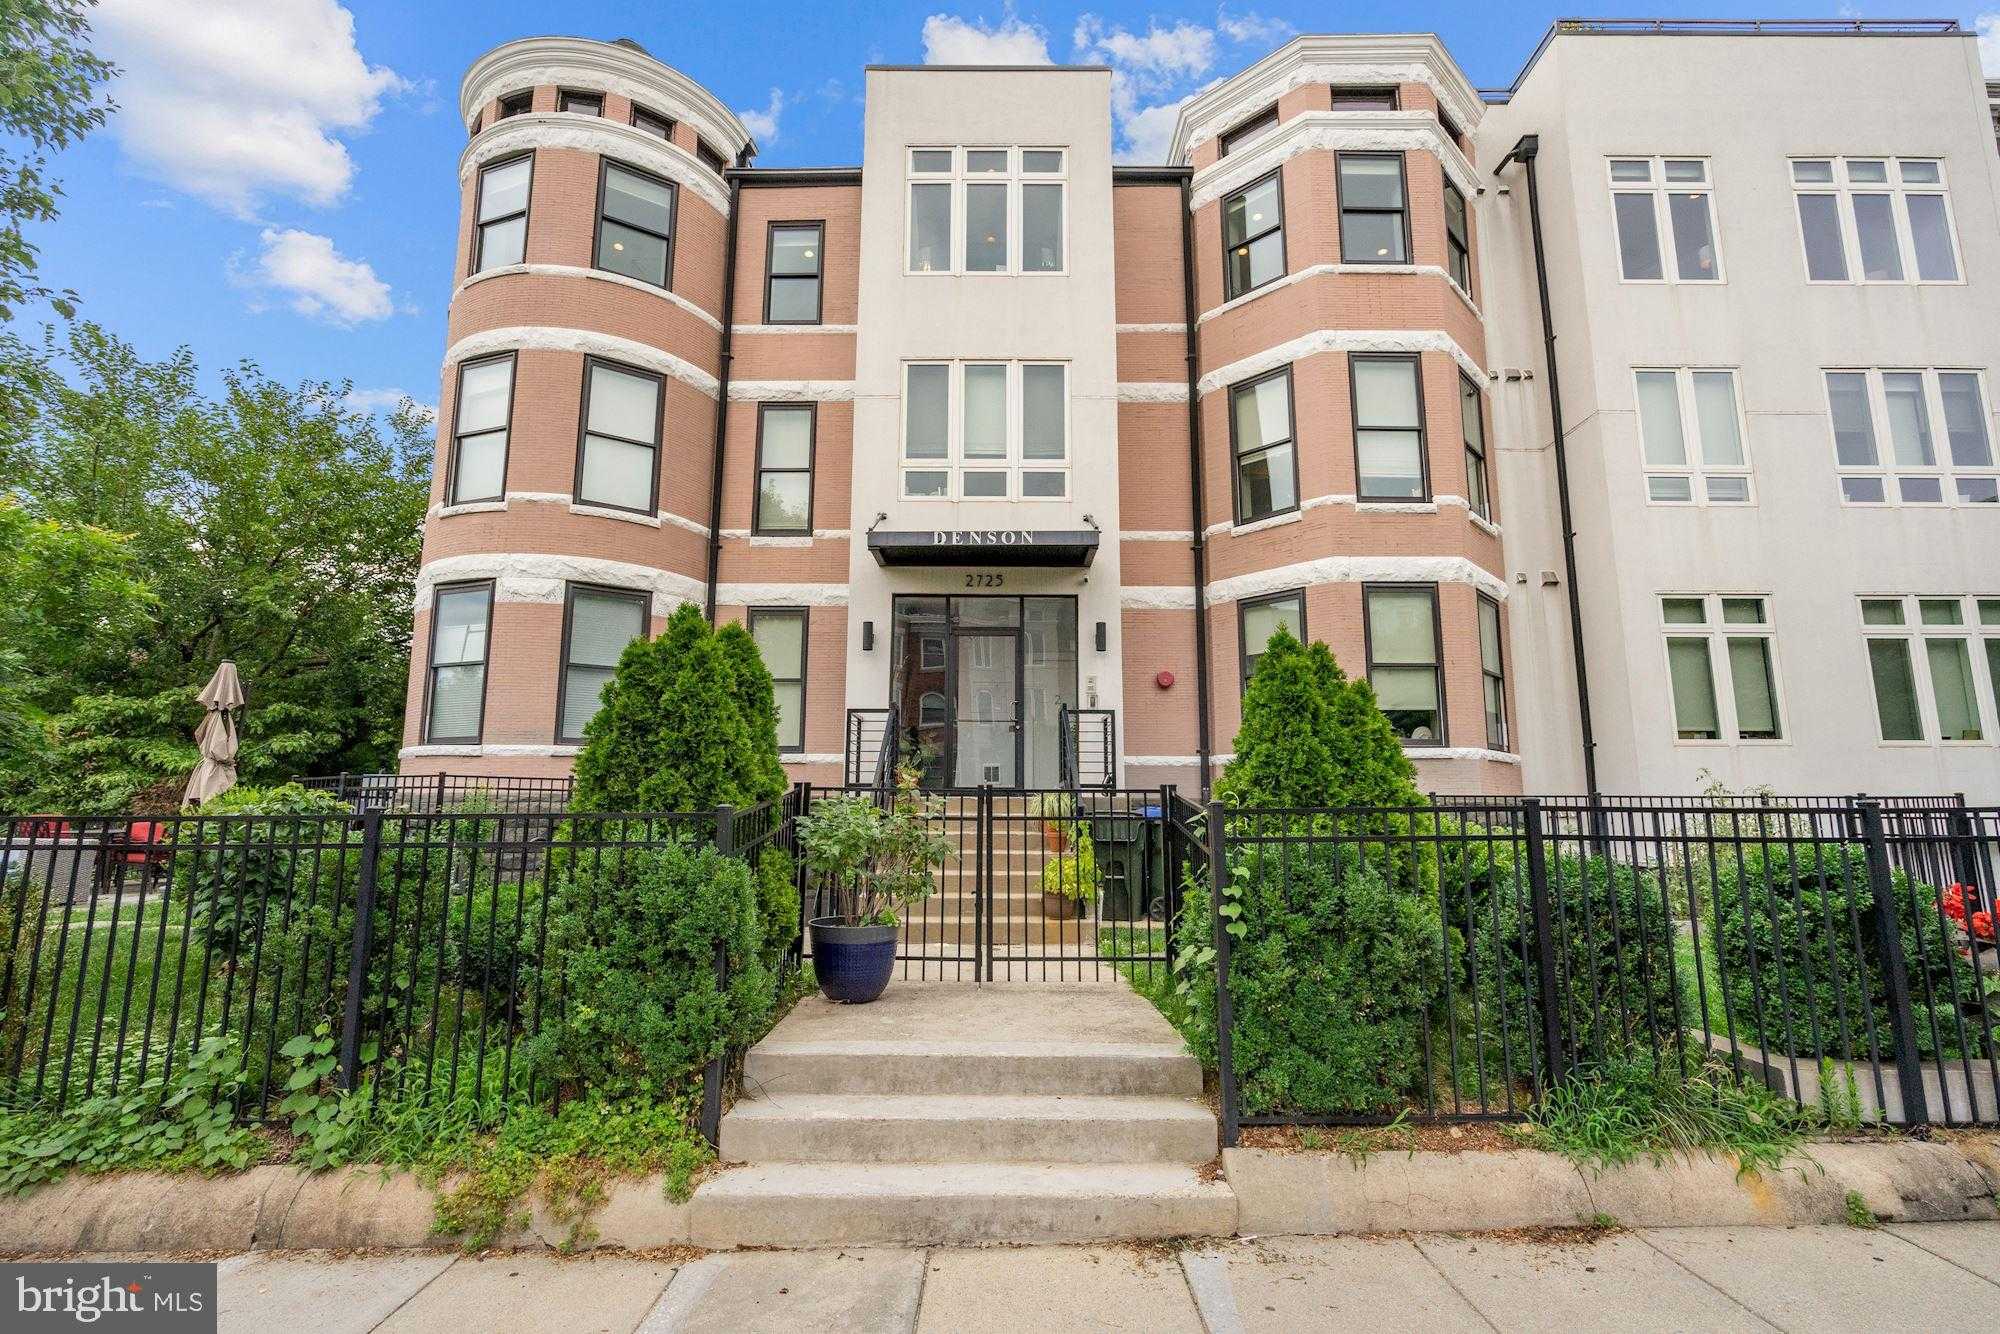 Photo of  2725 13th Street Nw Unit 4